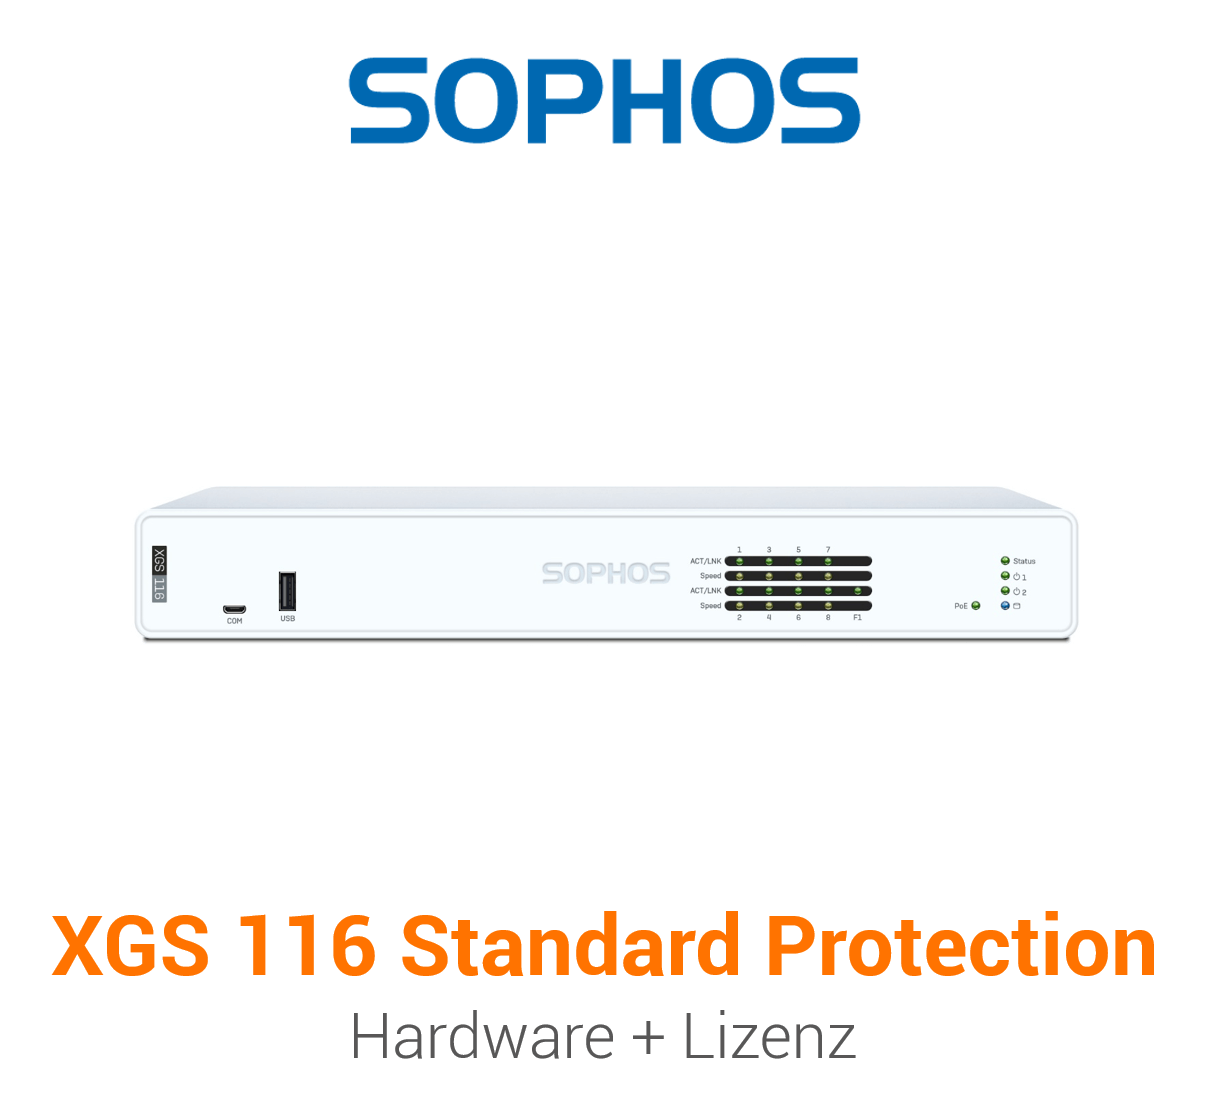 Sophos XGS 116 mit Standard Protection